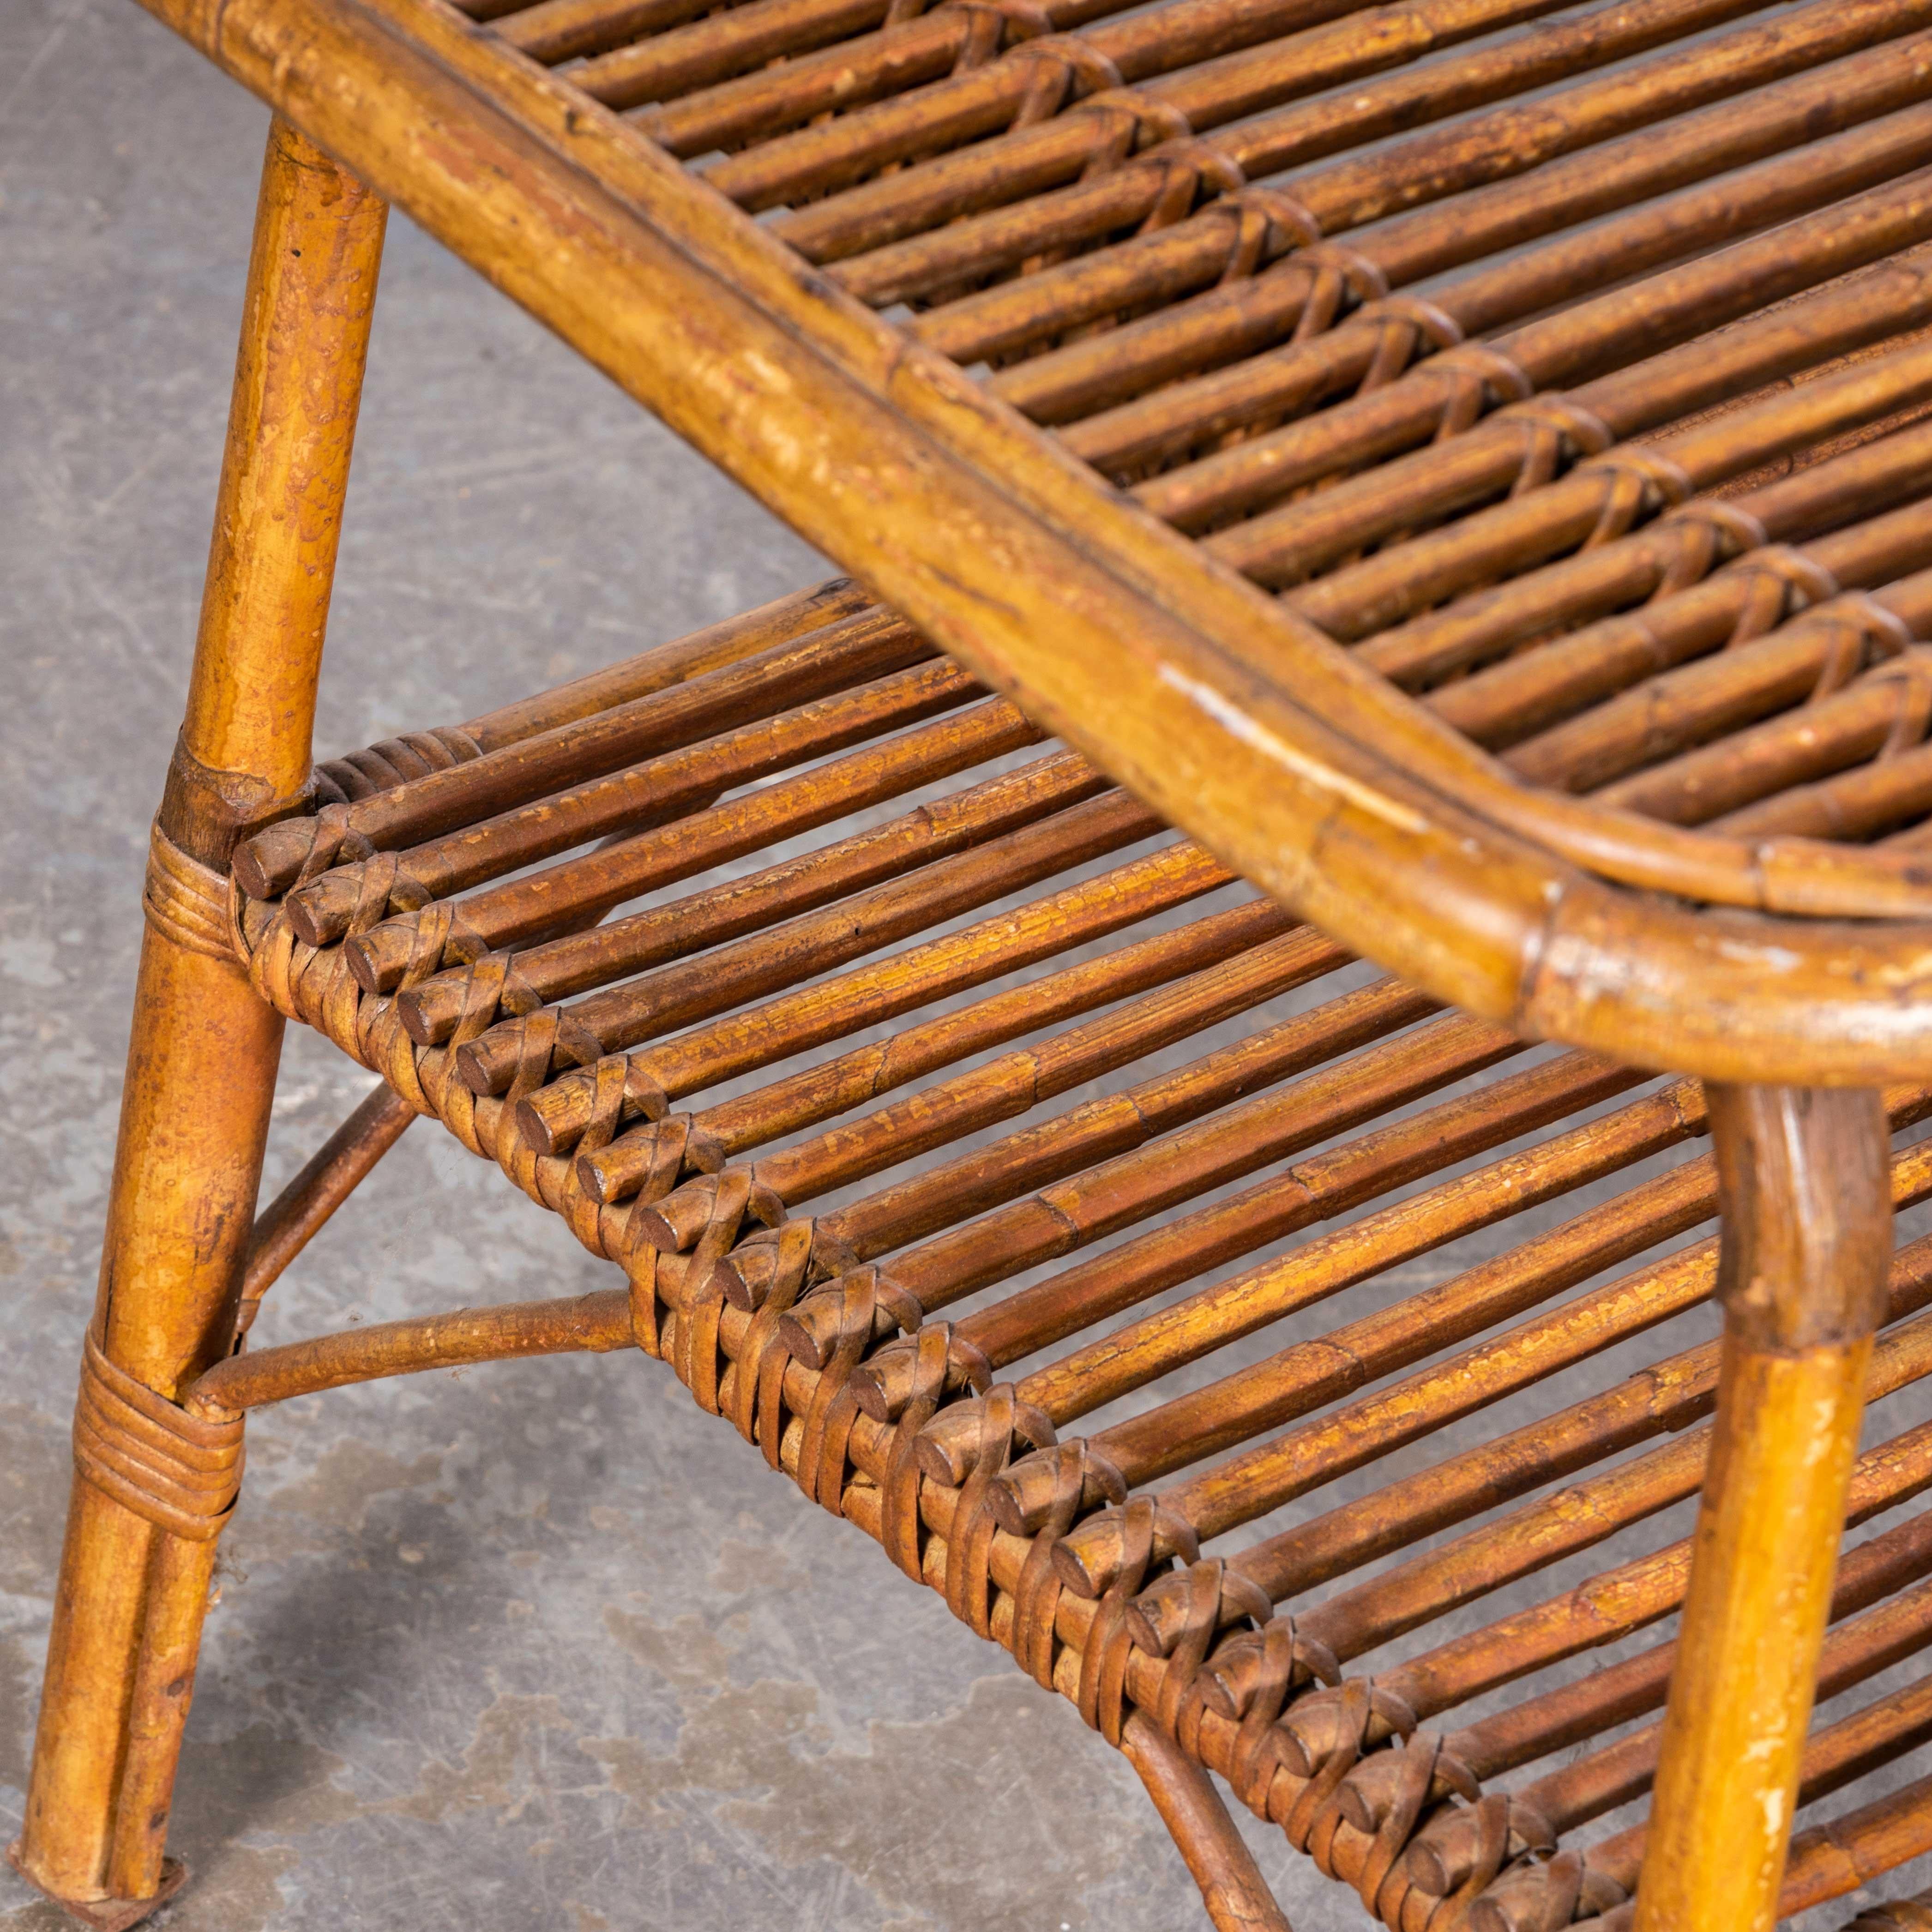 1950’s Original Rattan French Low Side Table
1950’s Original Rattan French Low Side Table. Good sized practical low side table with shelf. Shelf dimensions 54L x 43W x 29H to underside of top.

WORKSHOP REPORT
Our workshop team inspect every product